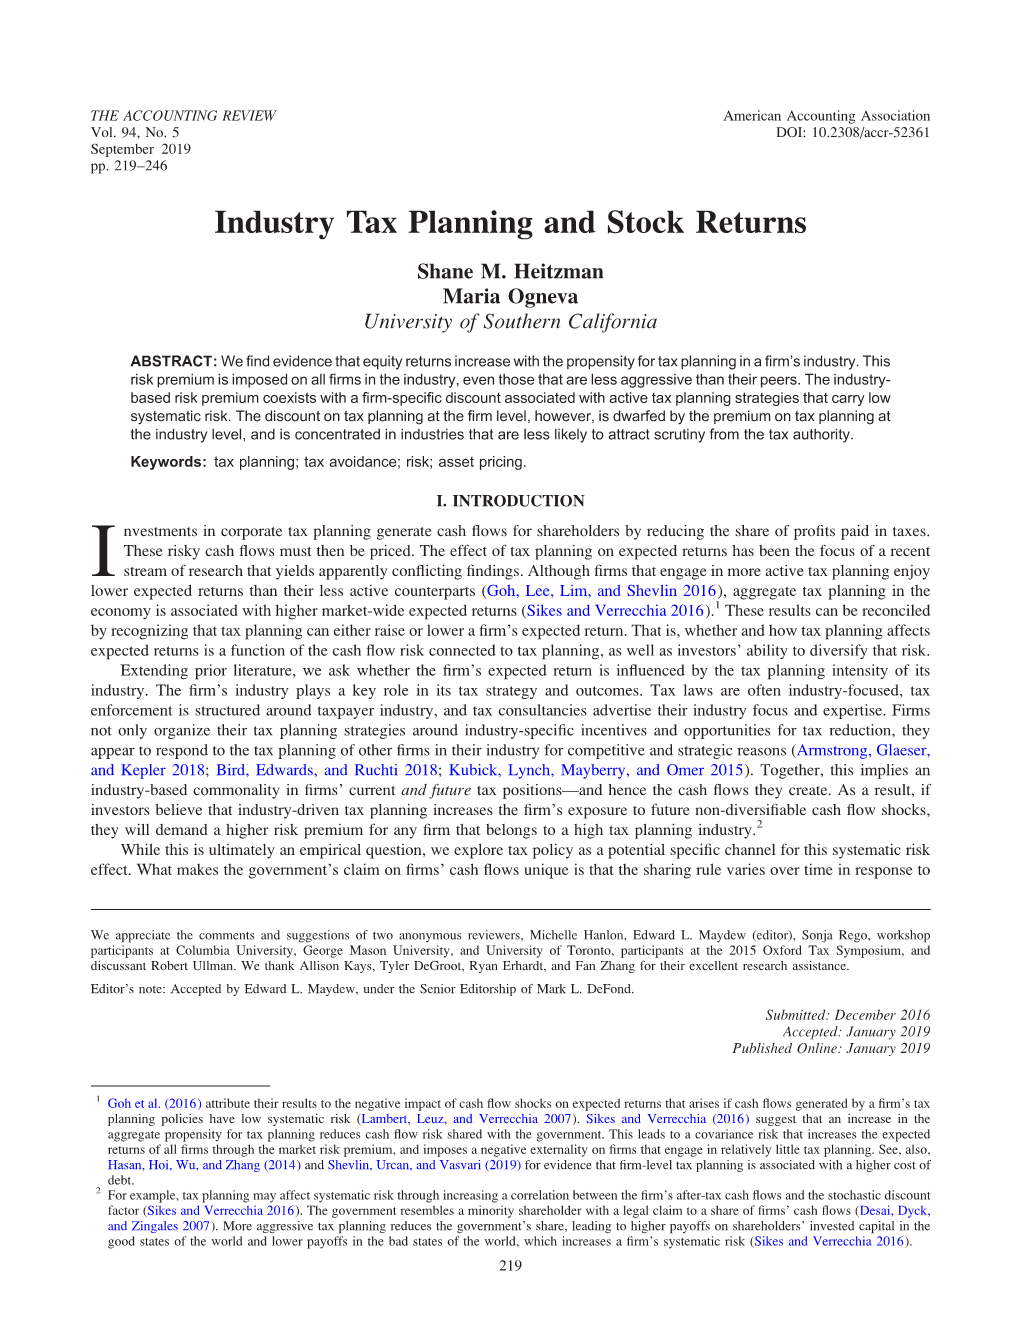 Industry Tax Planning and Stock Returns